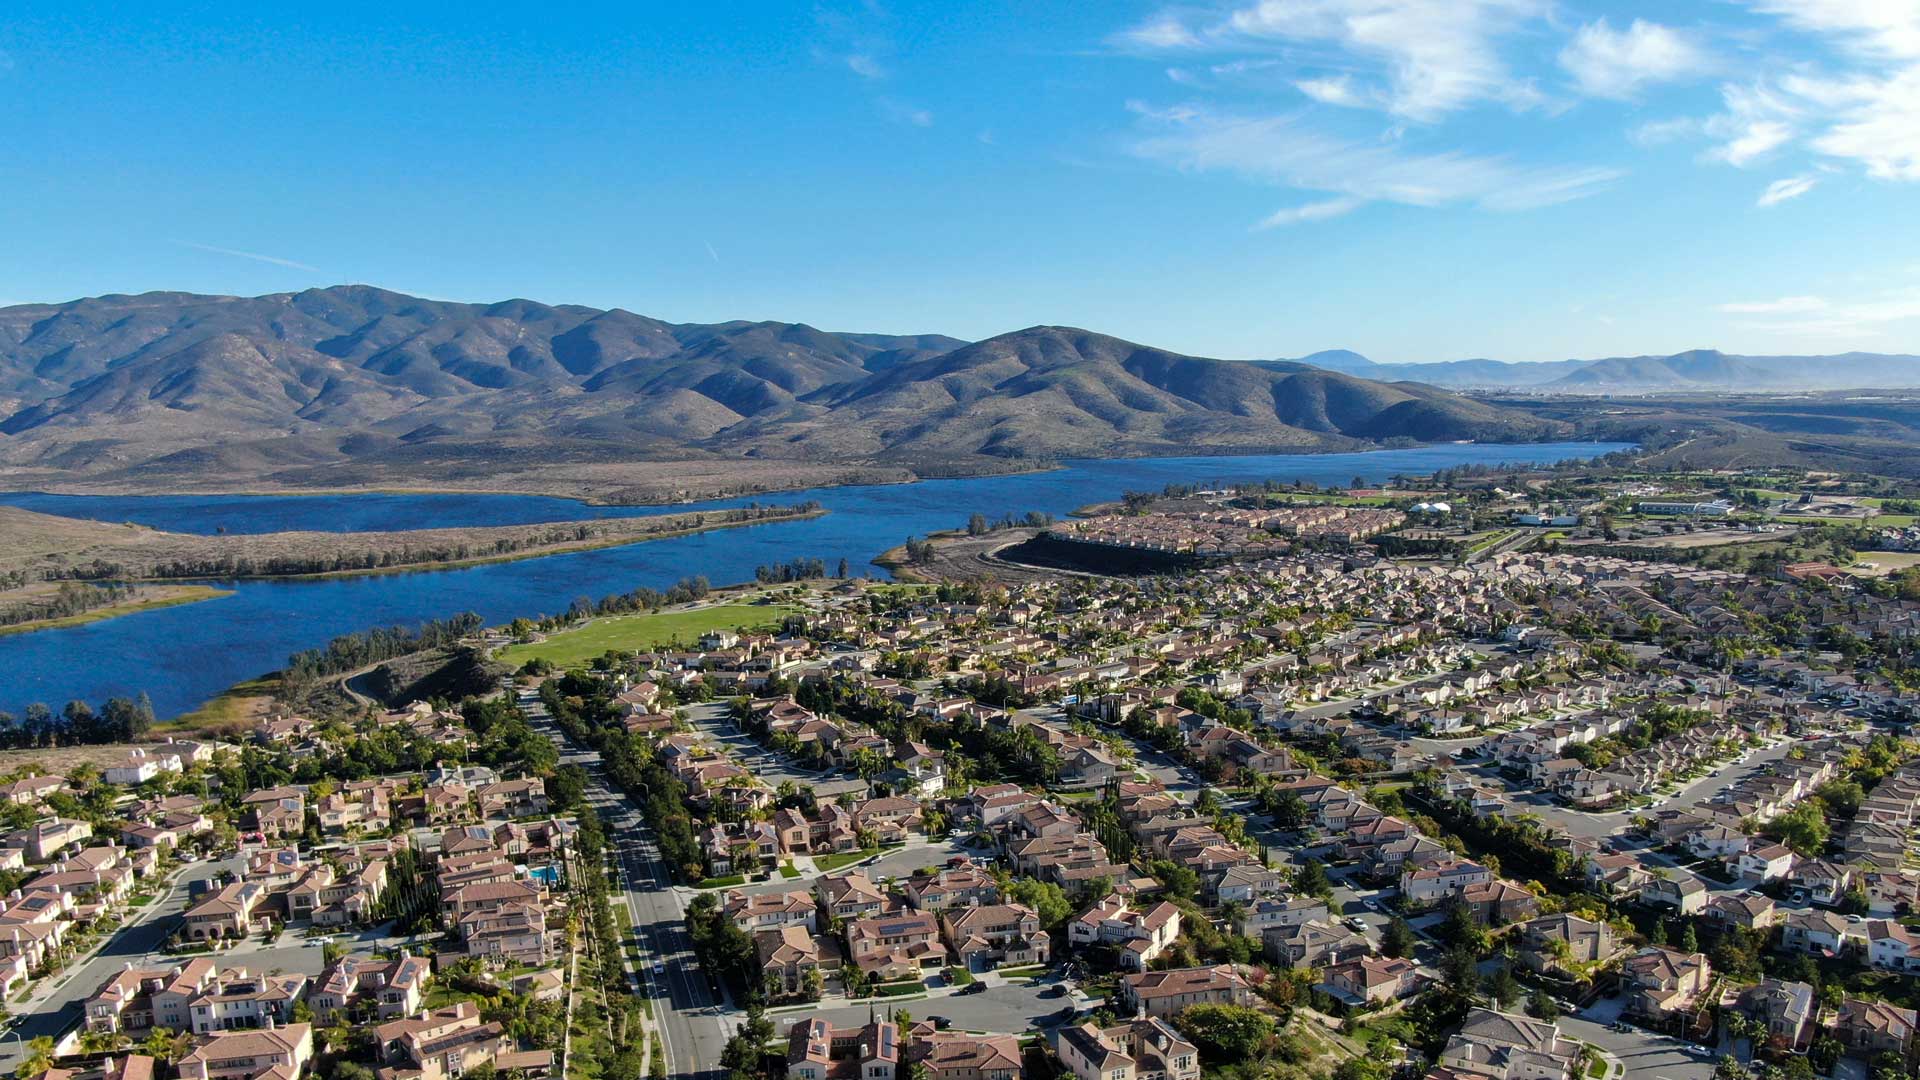 Chula Vista from above